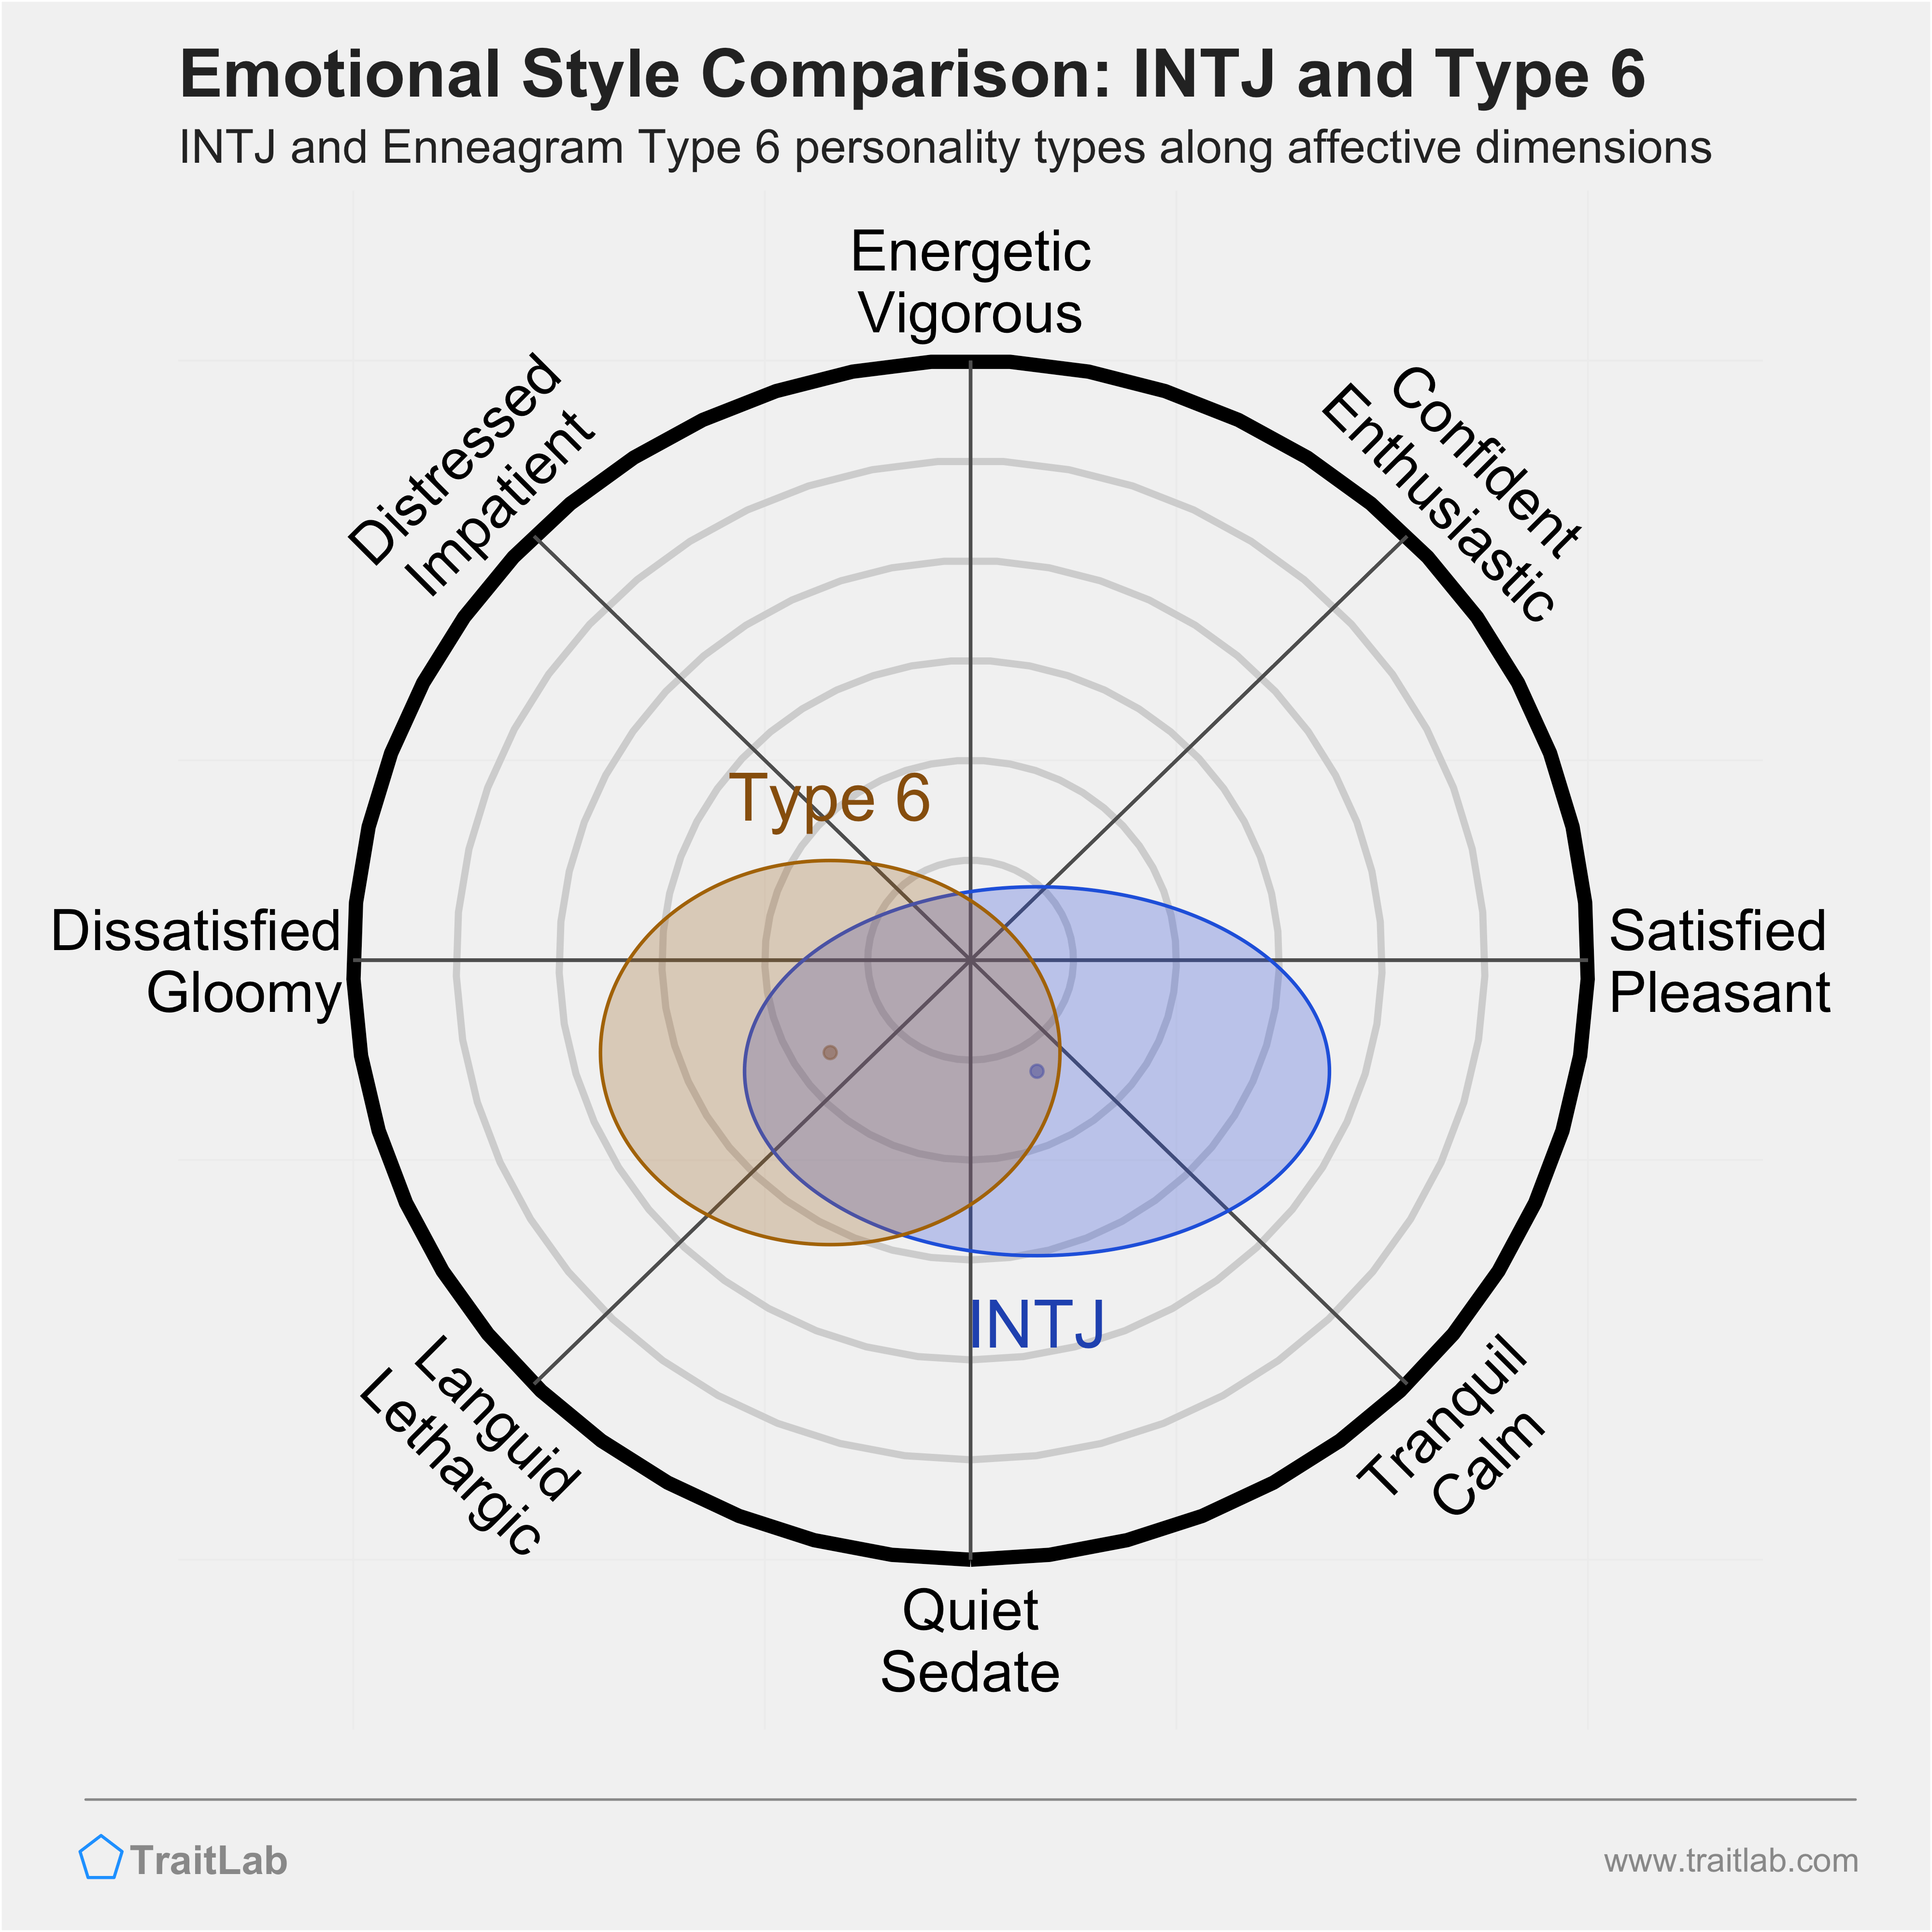 INTJ and Type 6 comparison across emotional (affective) dimensions